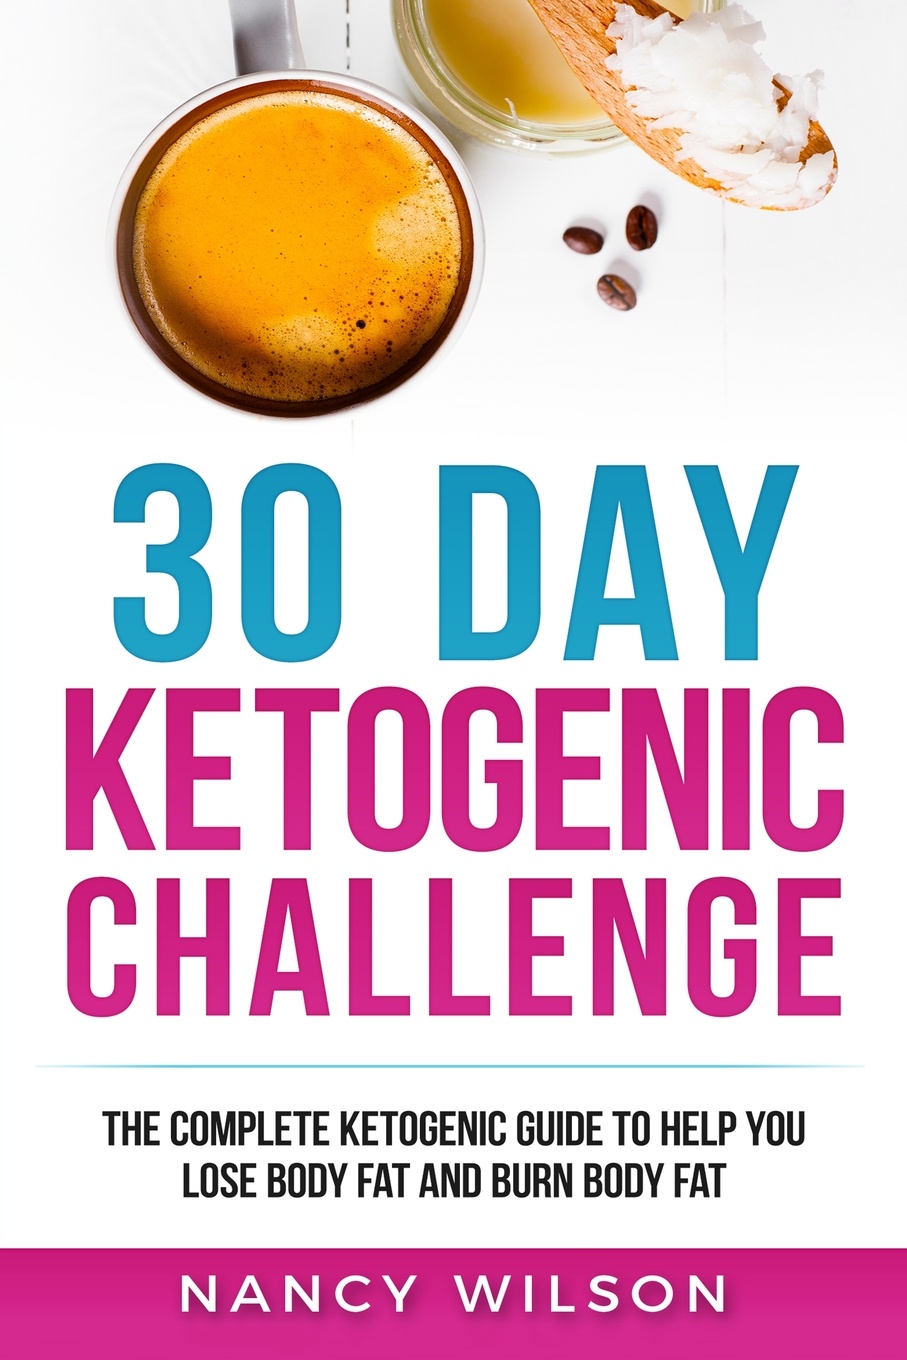 30 Day Ketogenic Challenge. The Complete Ketogenic Guide to Help You Lose Weight and Burn Body Fat